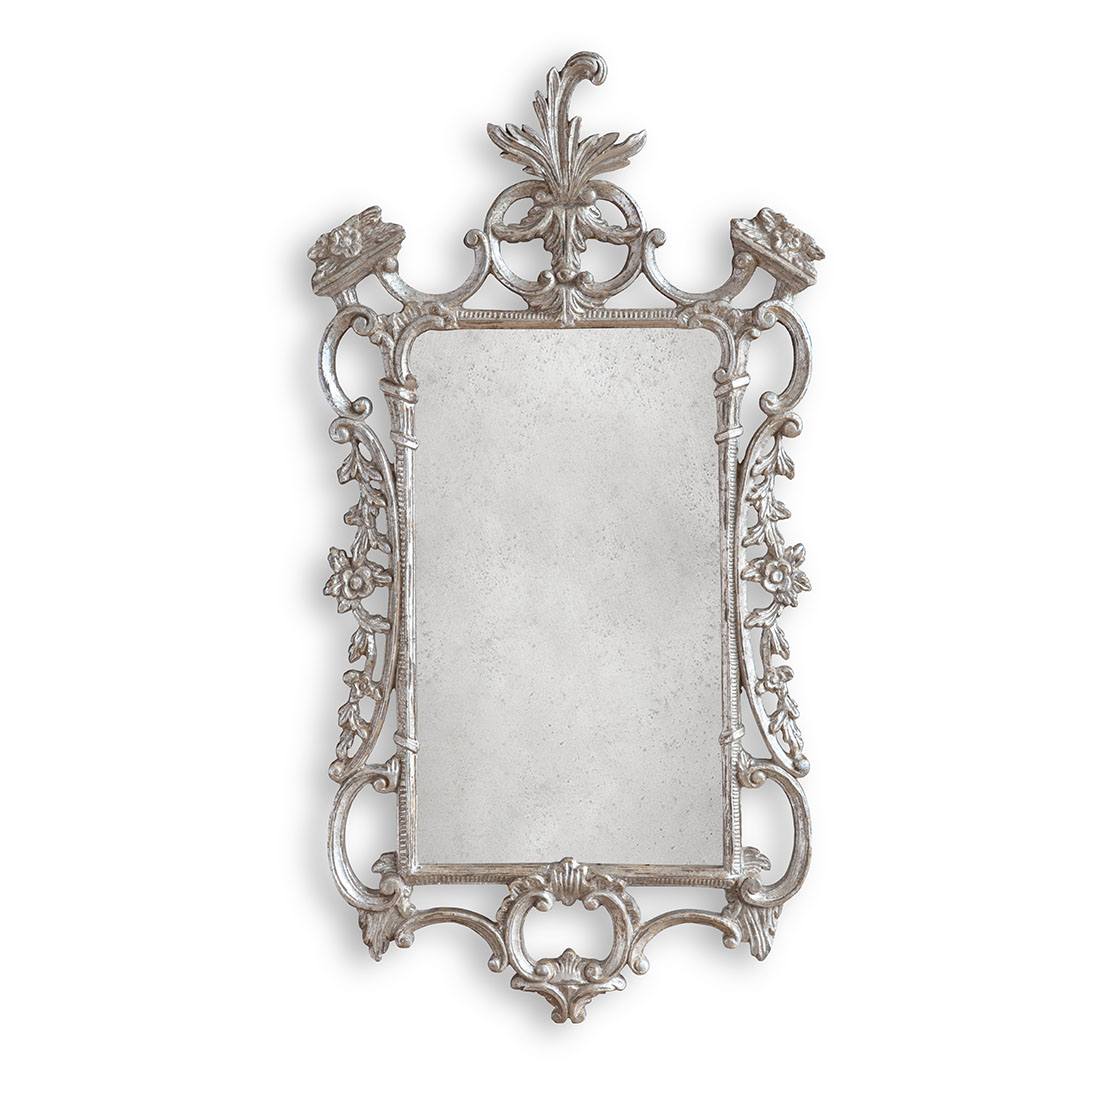 Chippendale mirror in Distressed silver - Beaumont & Fletcher